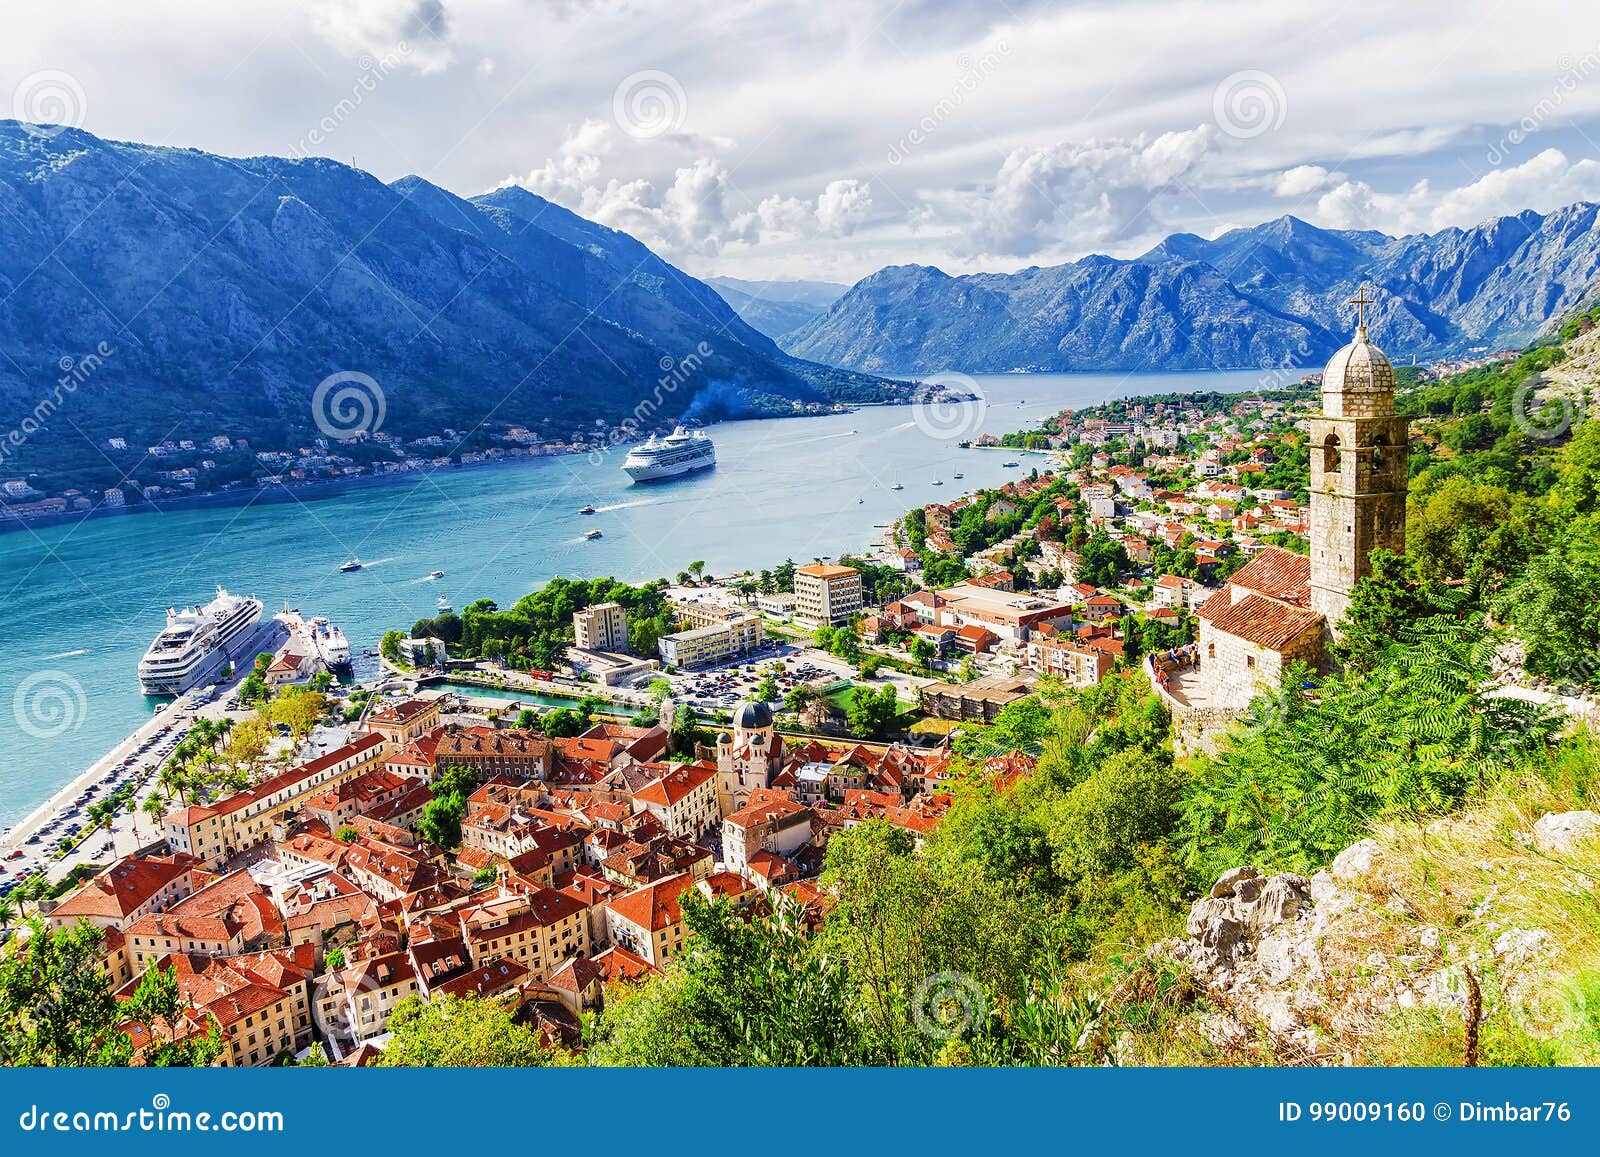 panorama of kotor and a view of the mountains, montenegro